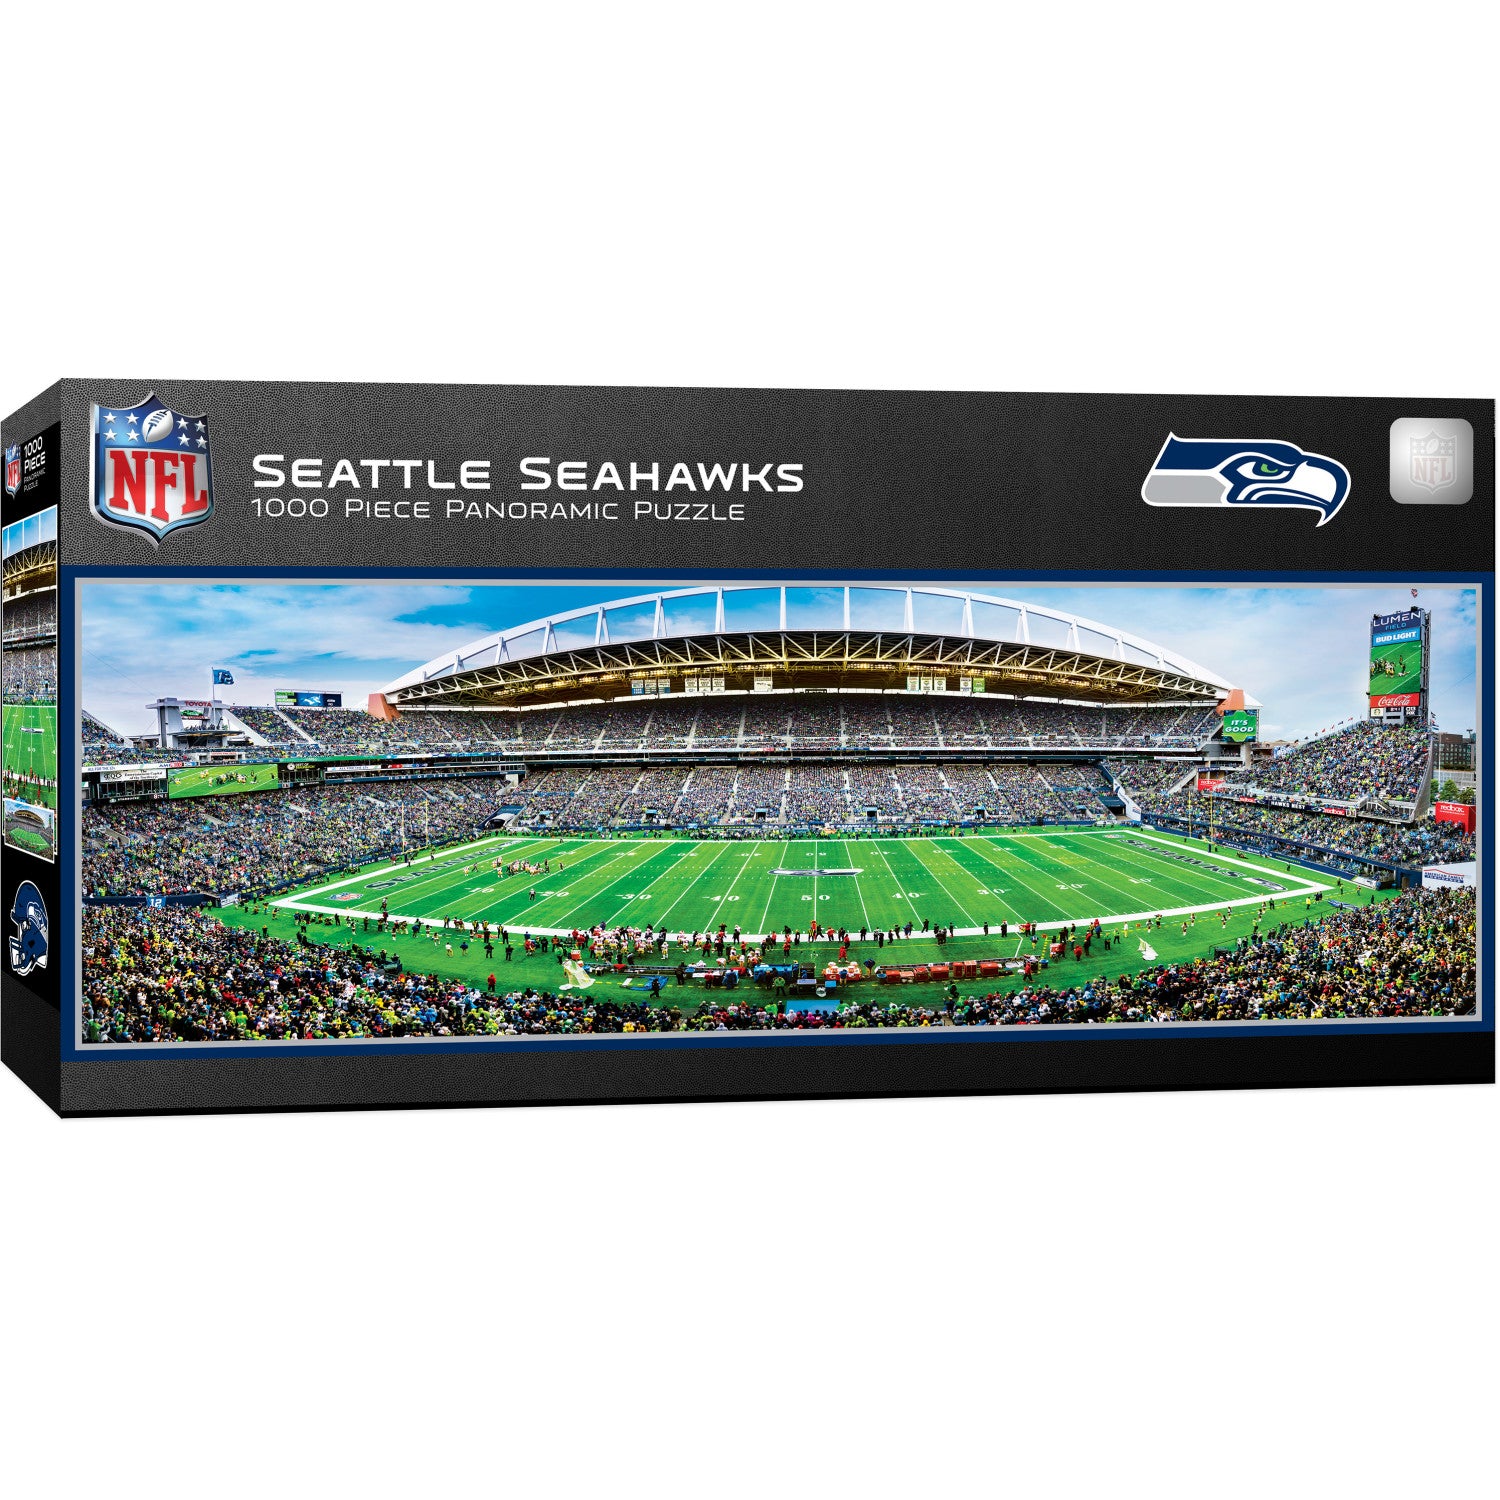 Seattle Seahawks - 1000 Piece Panoramic Jigsaw Puzzle - Center View